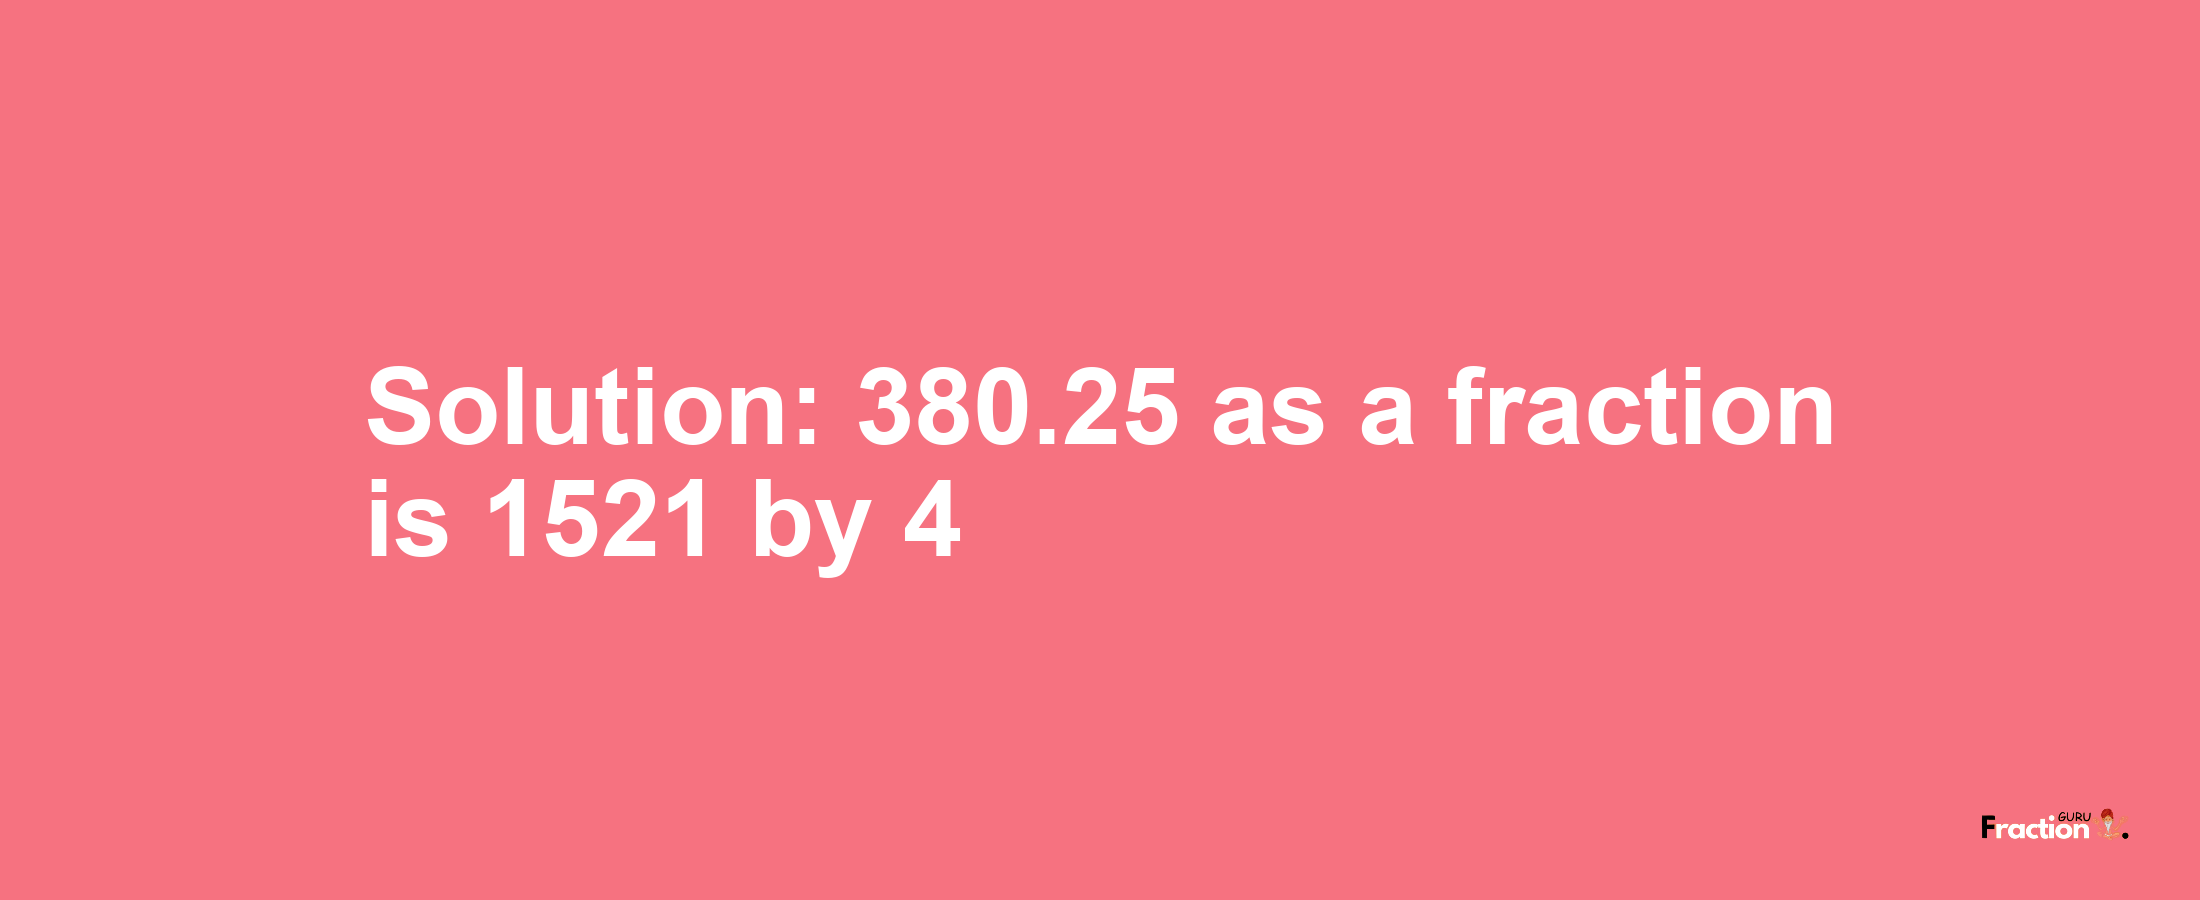 Solution:380.25 as a fraction is 1521/4